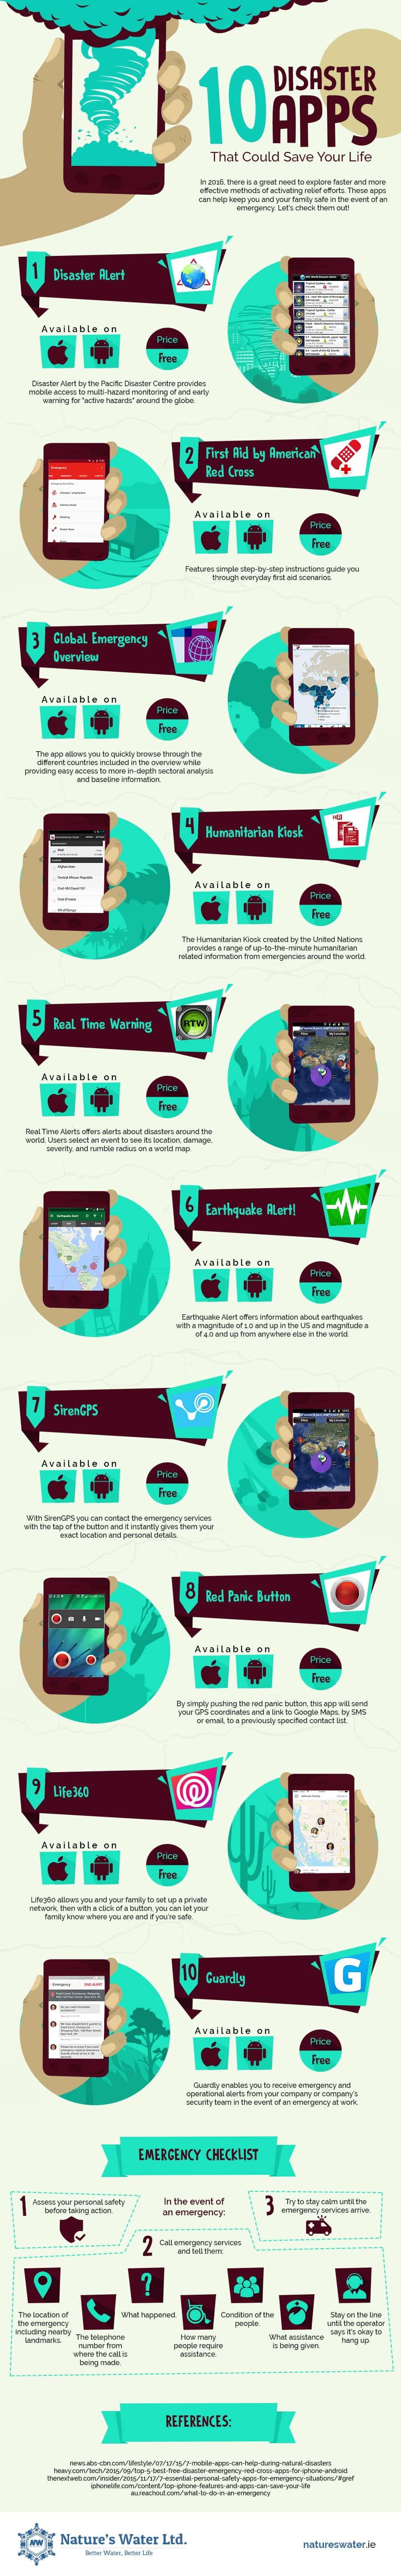 10-disaster-apps-that-could-save-your-life-infographic